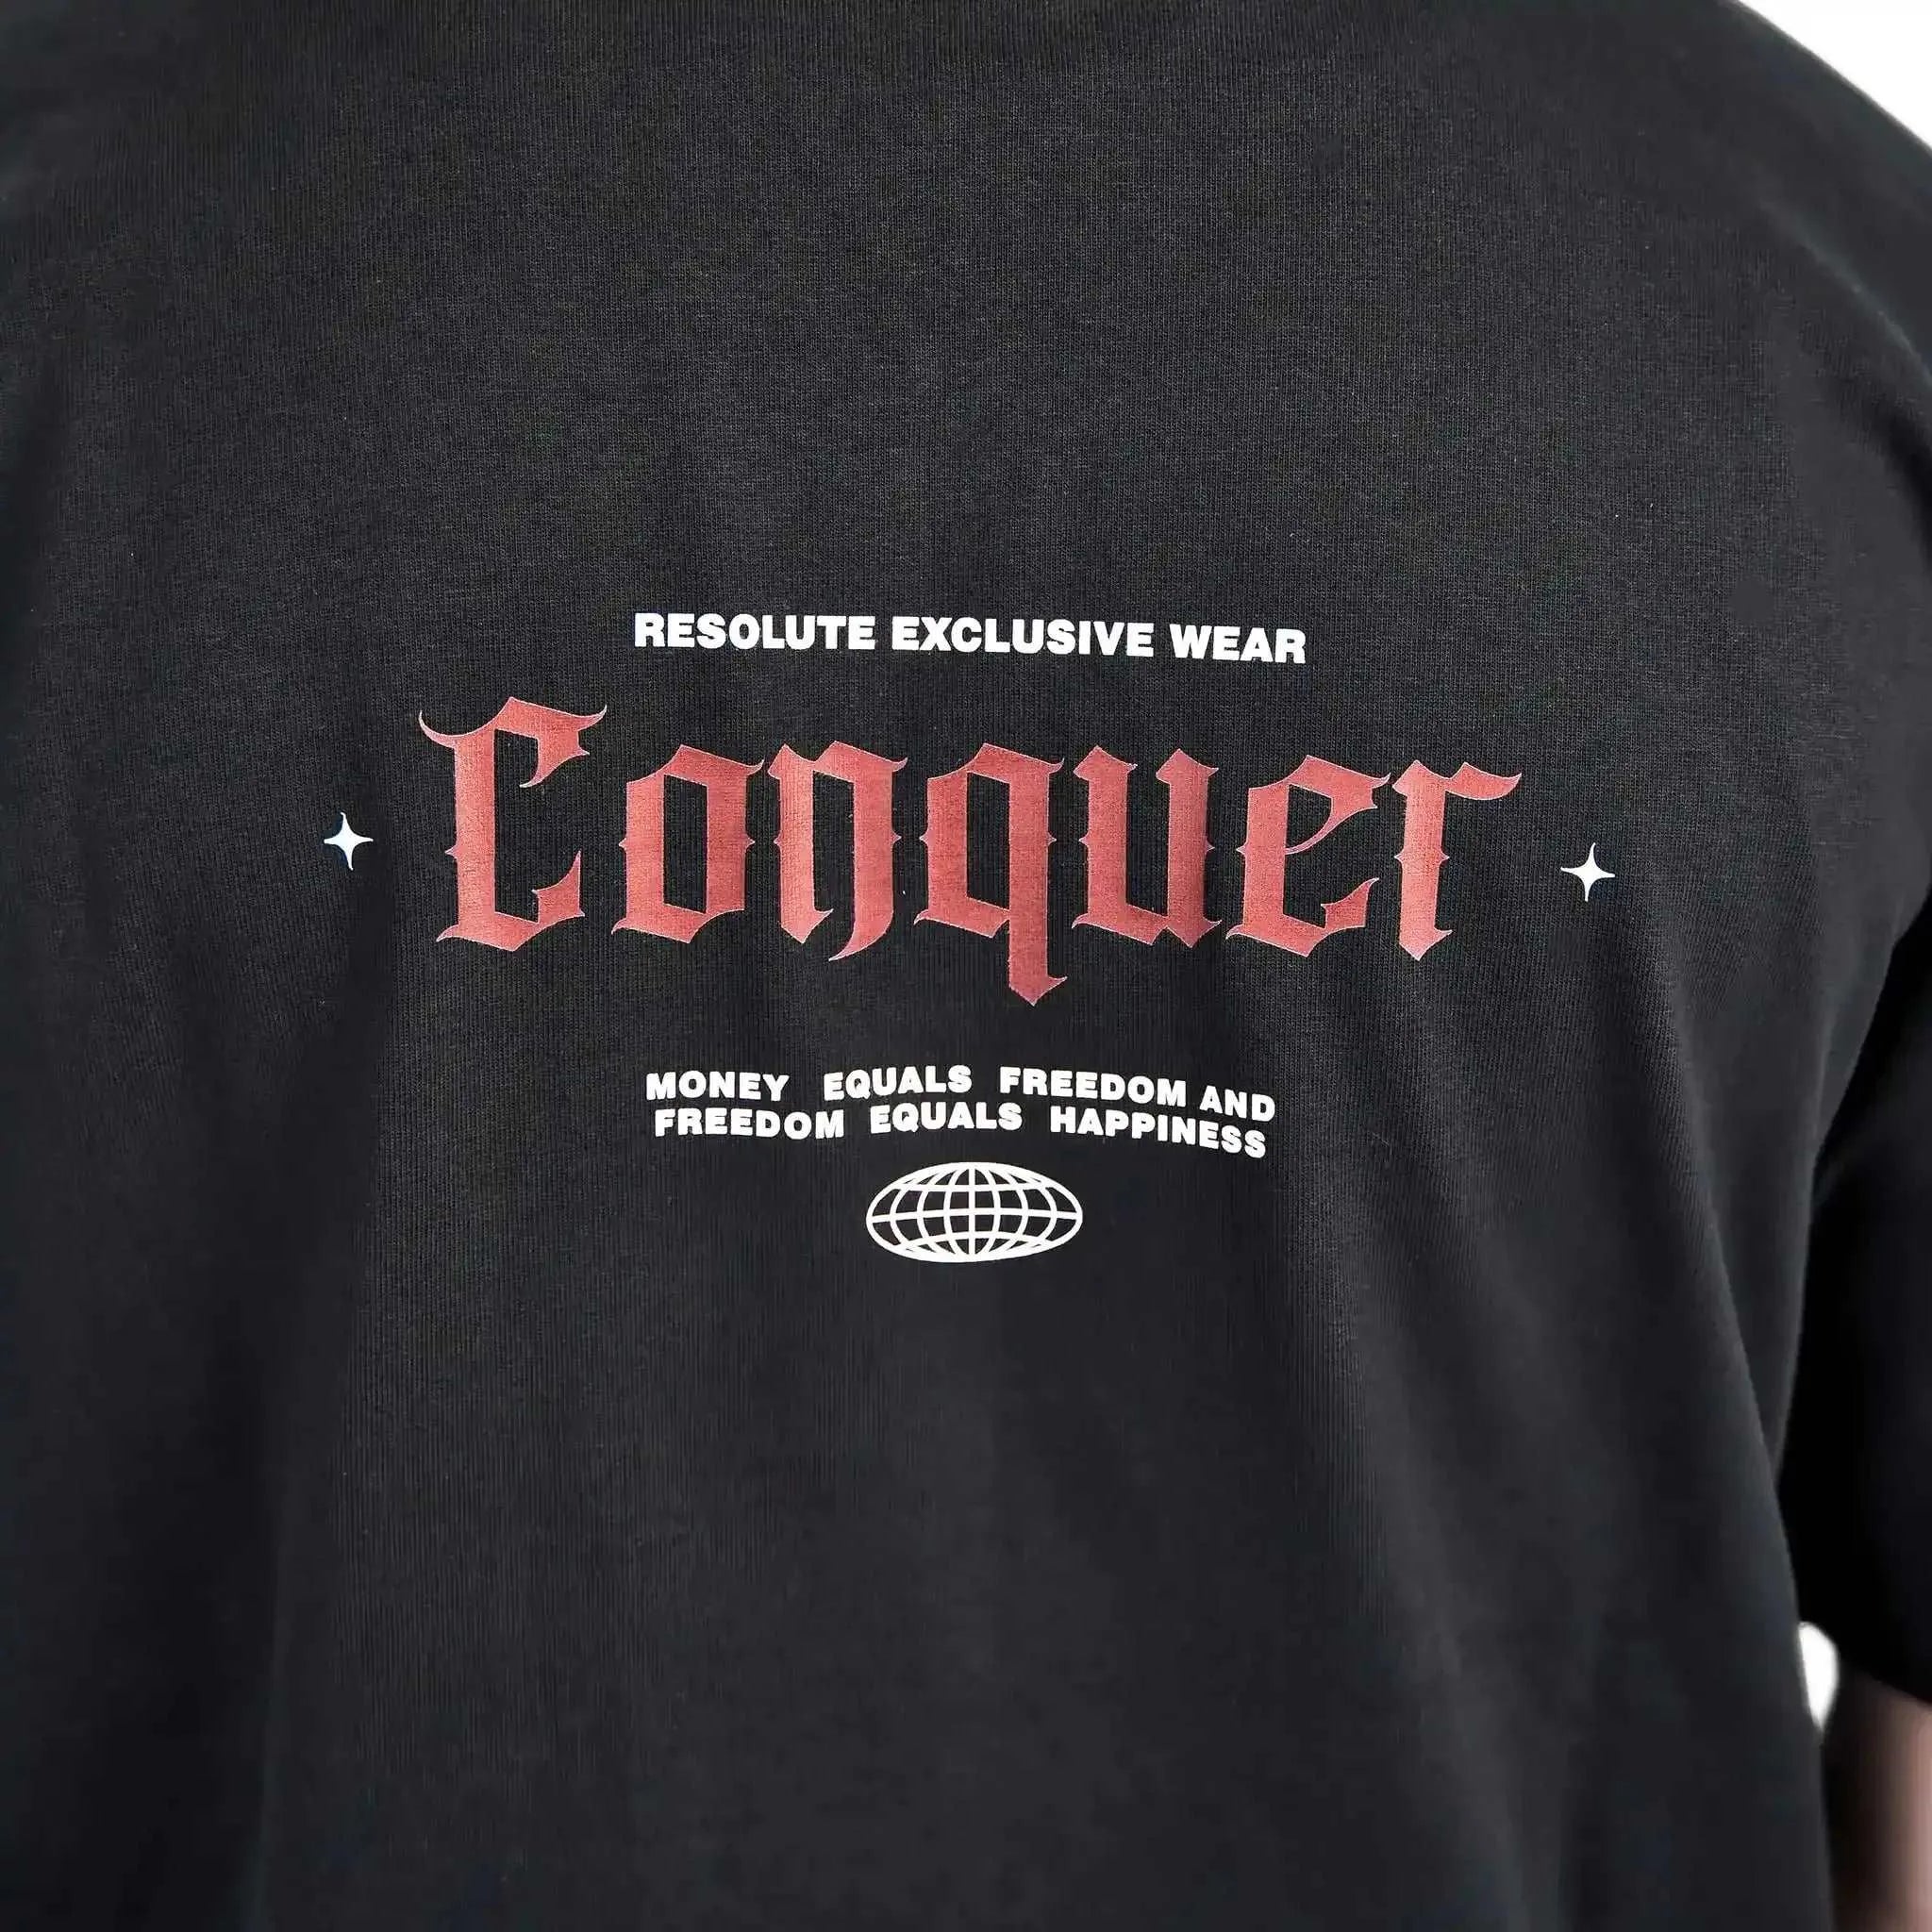 Heavy Tee, T-Shirt, Clothing, Resolute Exclusive Wear